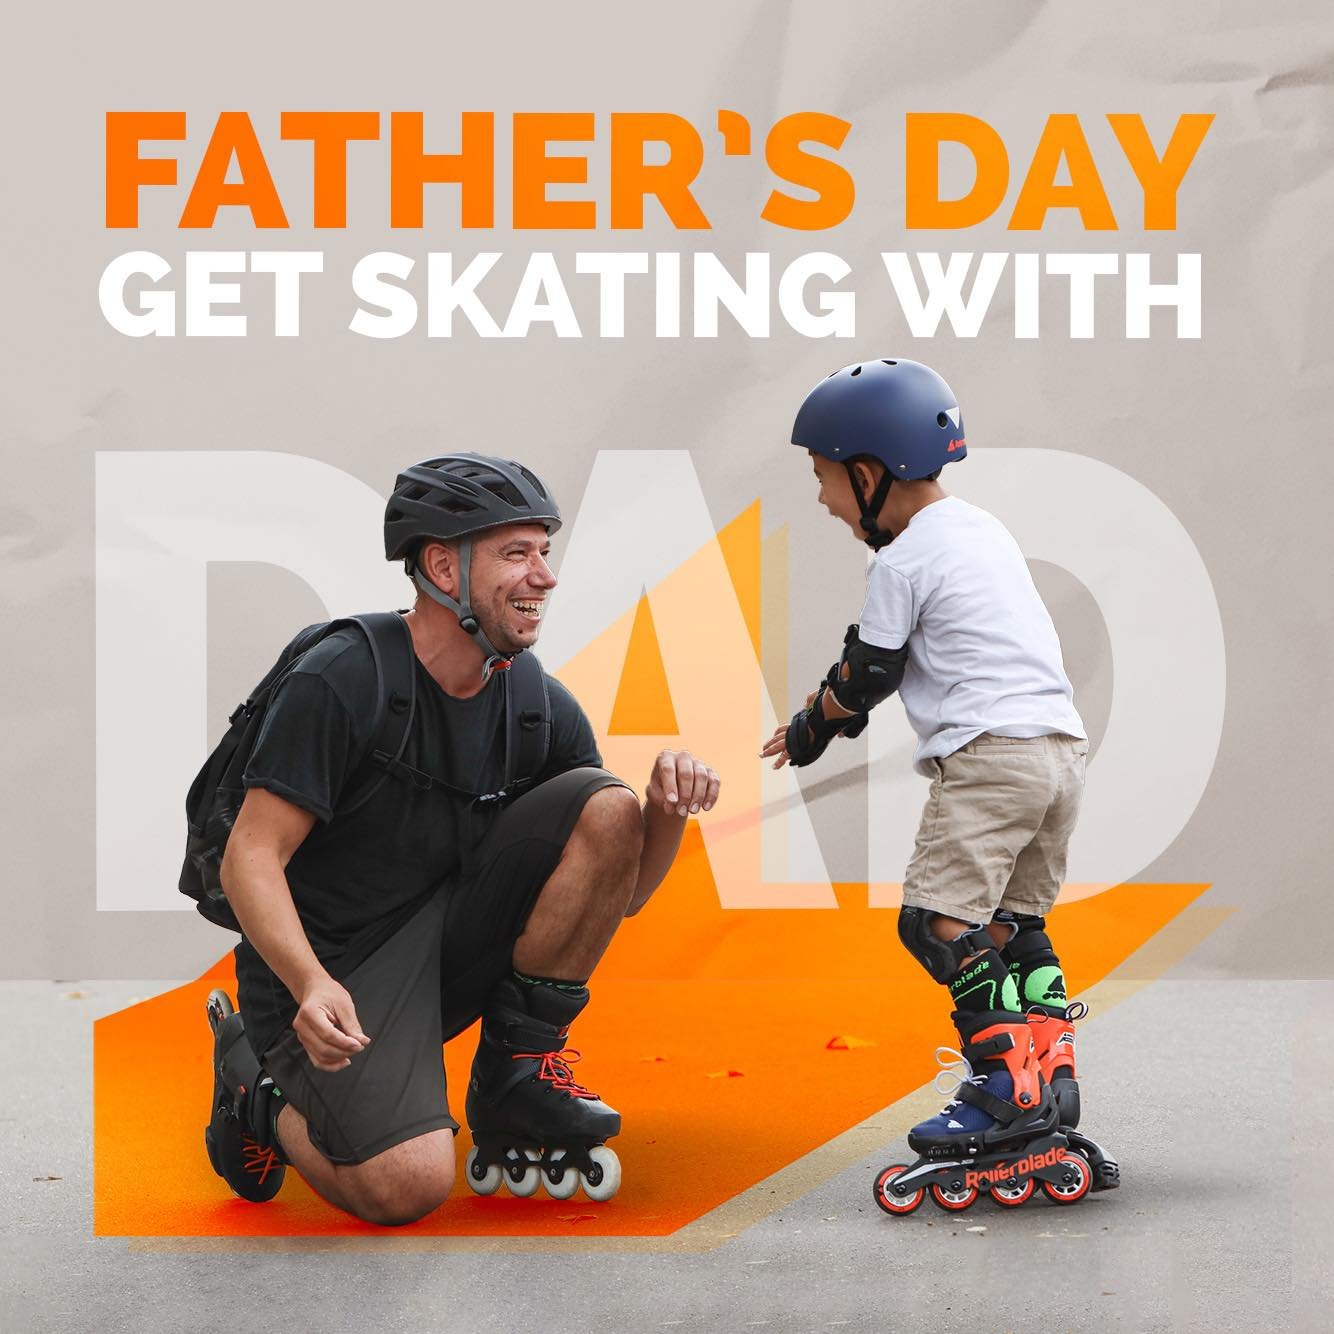 Bayside Blades: Father's Day Gift Guide - things he'll love and